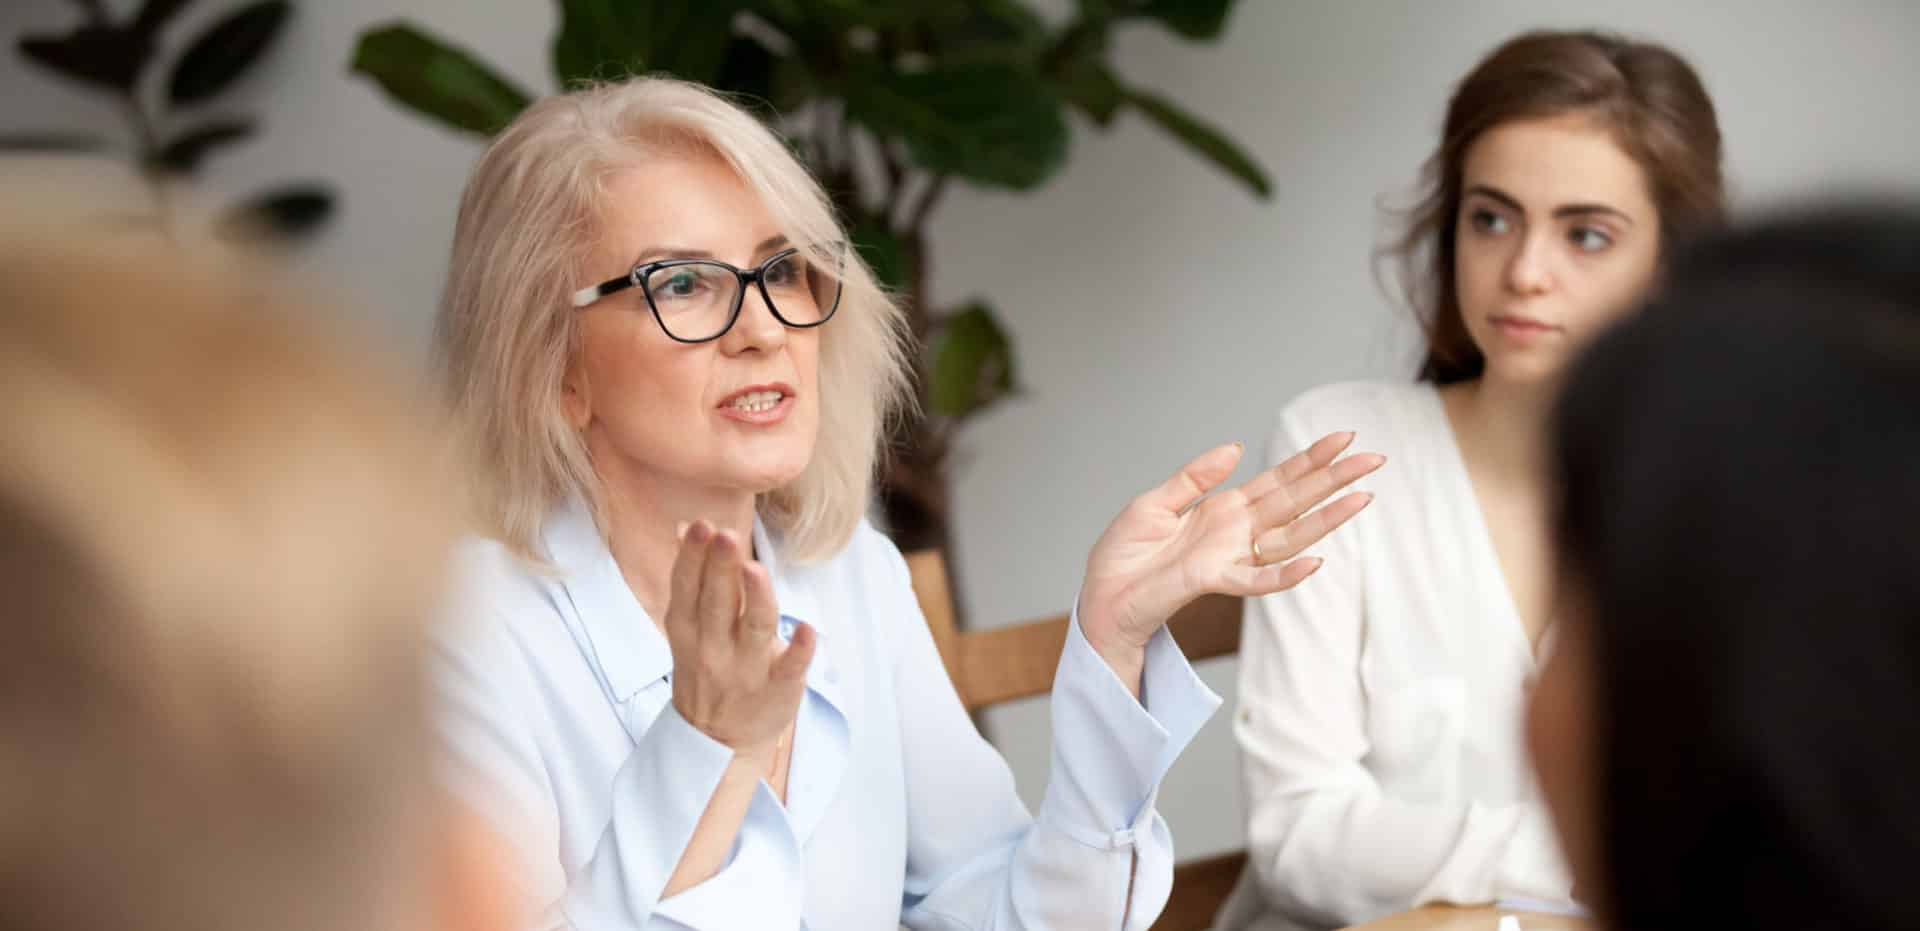 Older woman, professionally dressed with hands out talking to group of adults